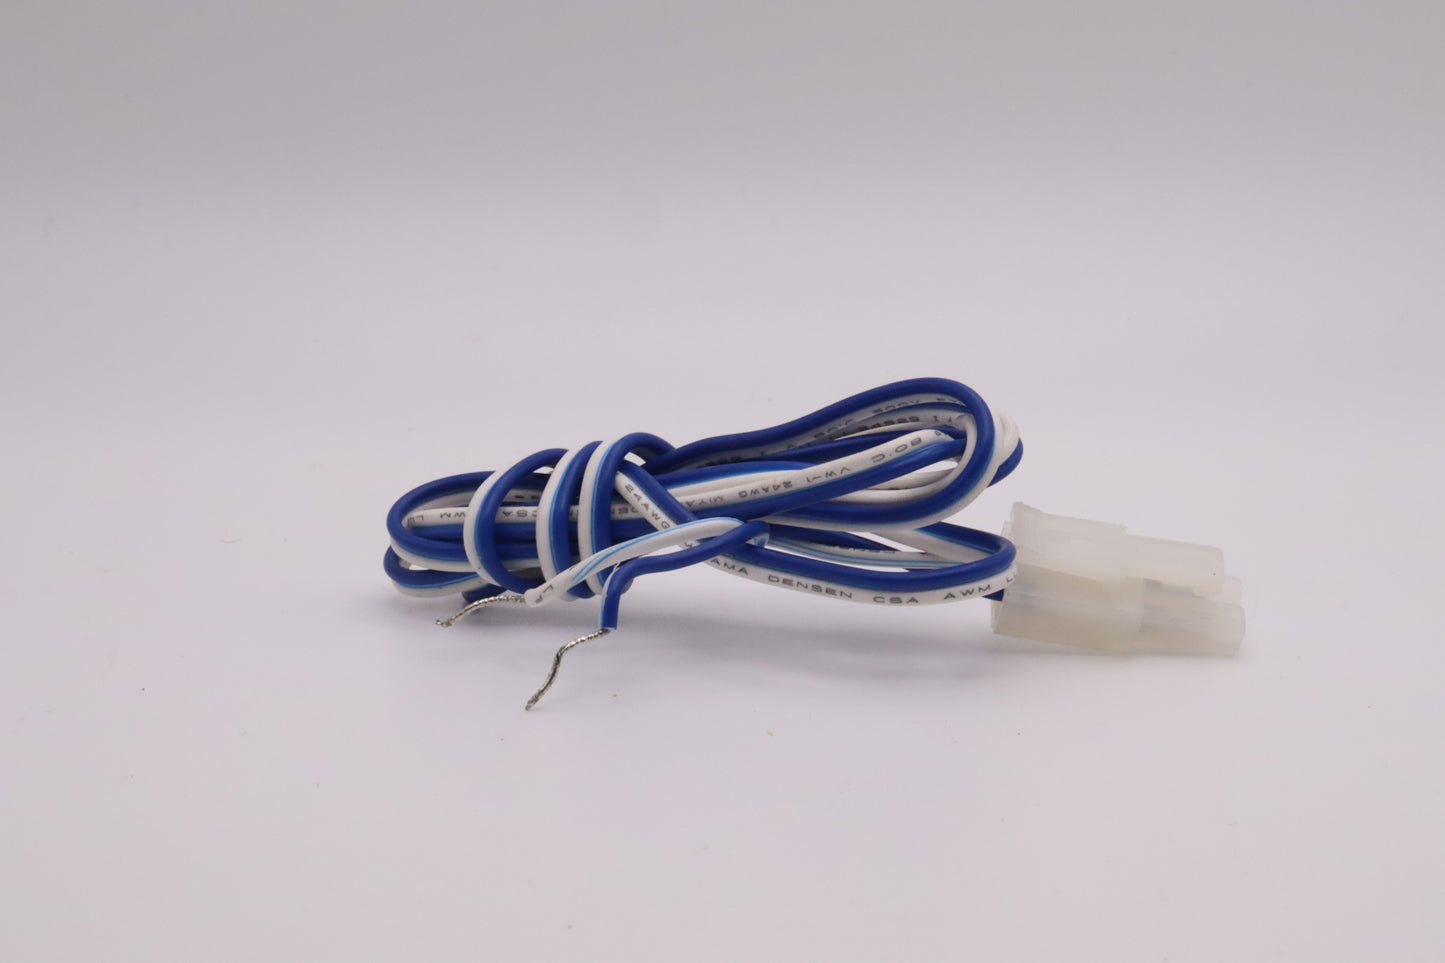 KAT-24-825 - DC Extension Cord - 1 pc, loose, no package, end removed.